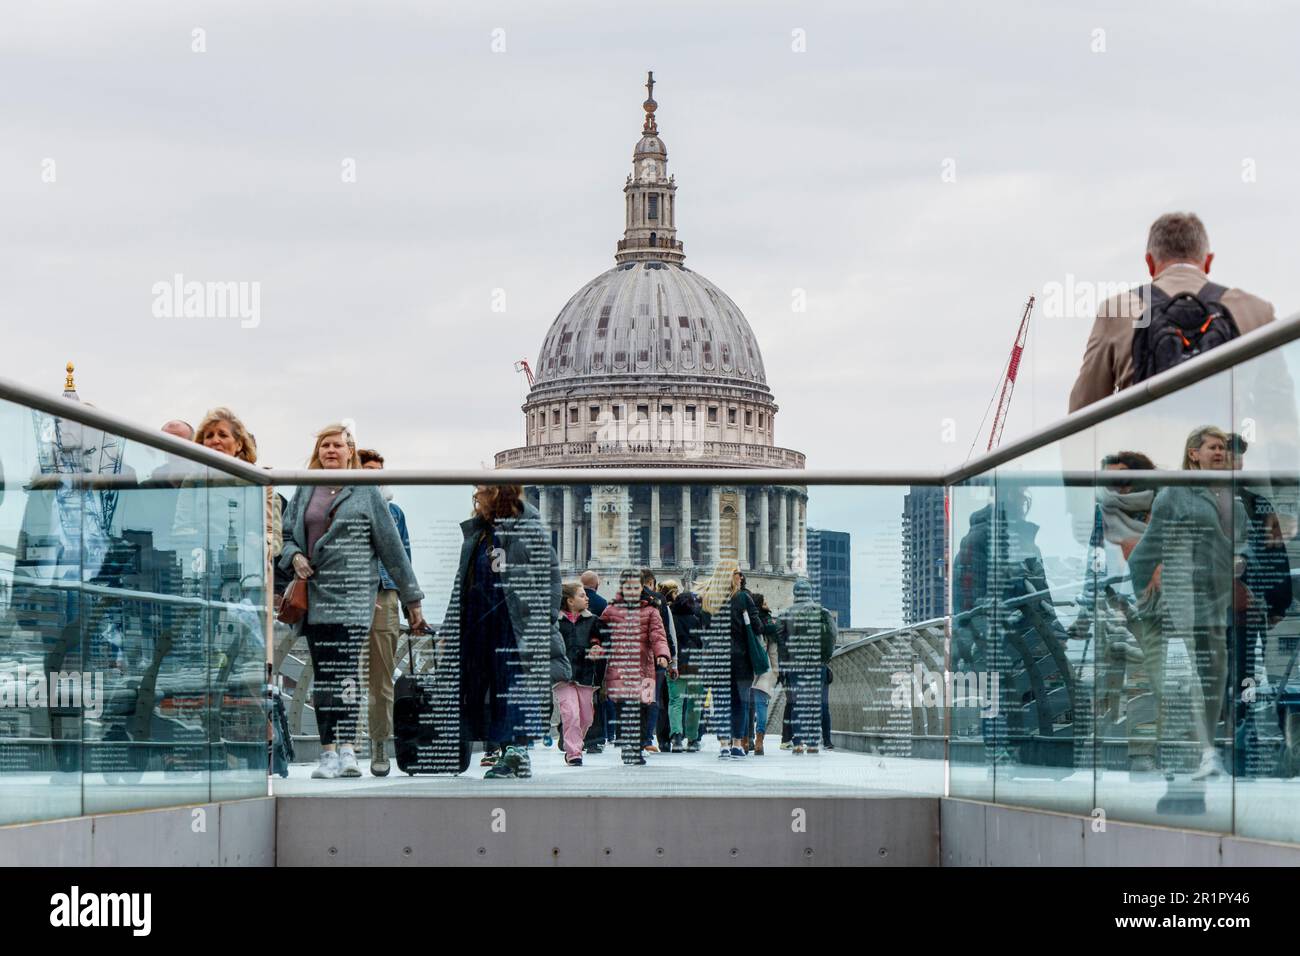 Pedestrians on the Millennium Bridge, St Paul's Cathedral in the background, London, UK Stock Photo